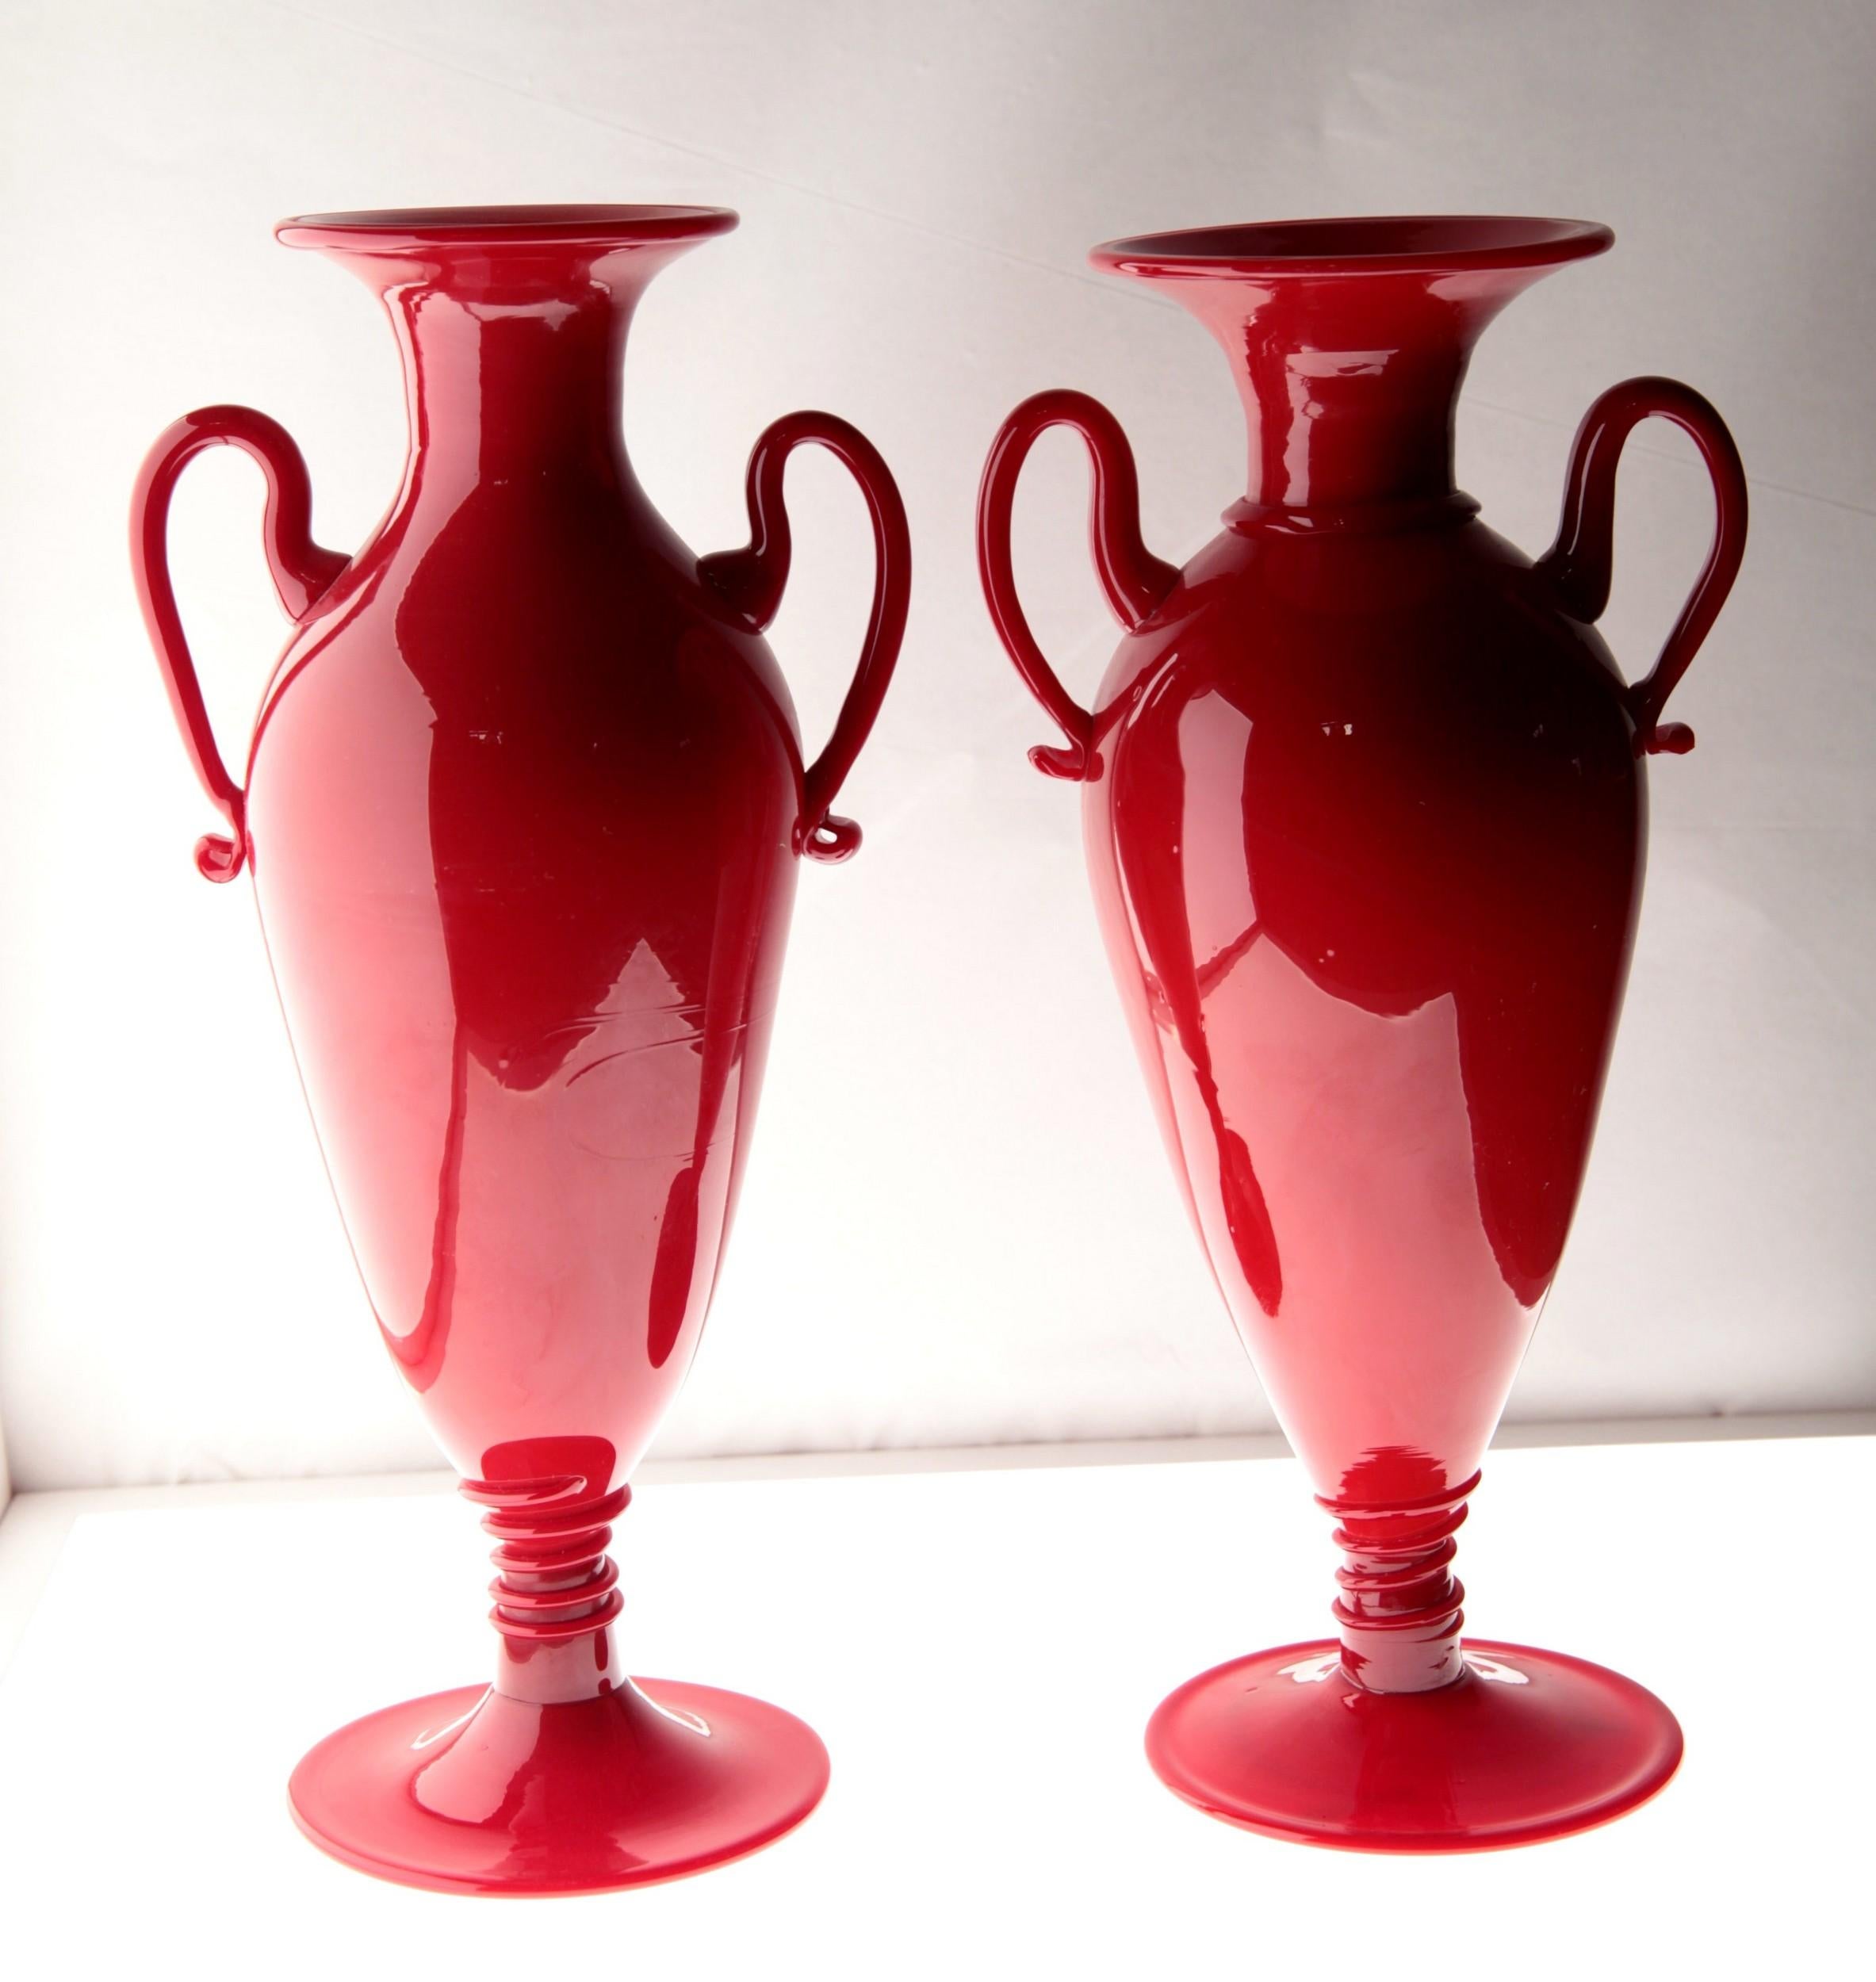 From Pauly these are two Napoleone Martinuzzi vases.
This is an early design from Martinuzzi that has been replicated by Pauly probably when Martinuzzi collaborated with Pauly in the 1960s. At the time young Alfredo Barbini was making Martinuzzi